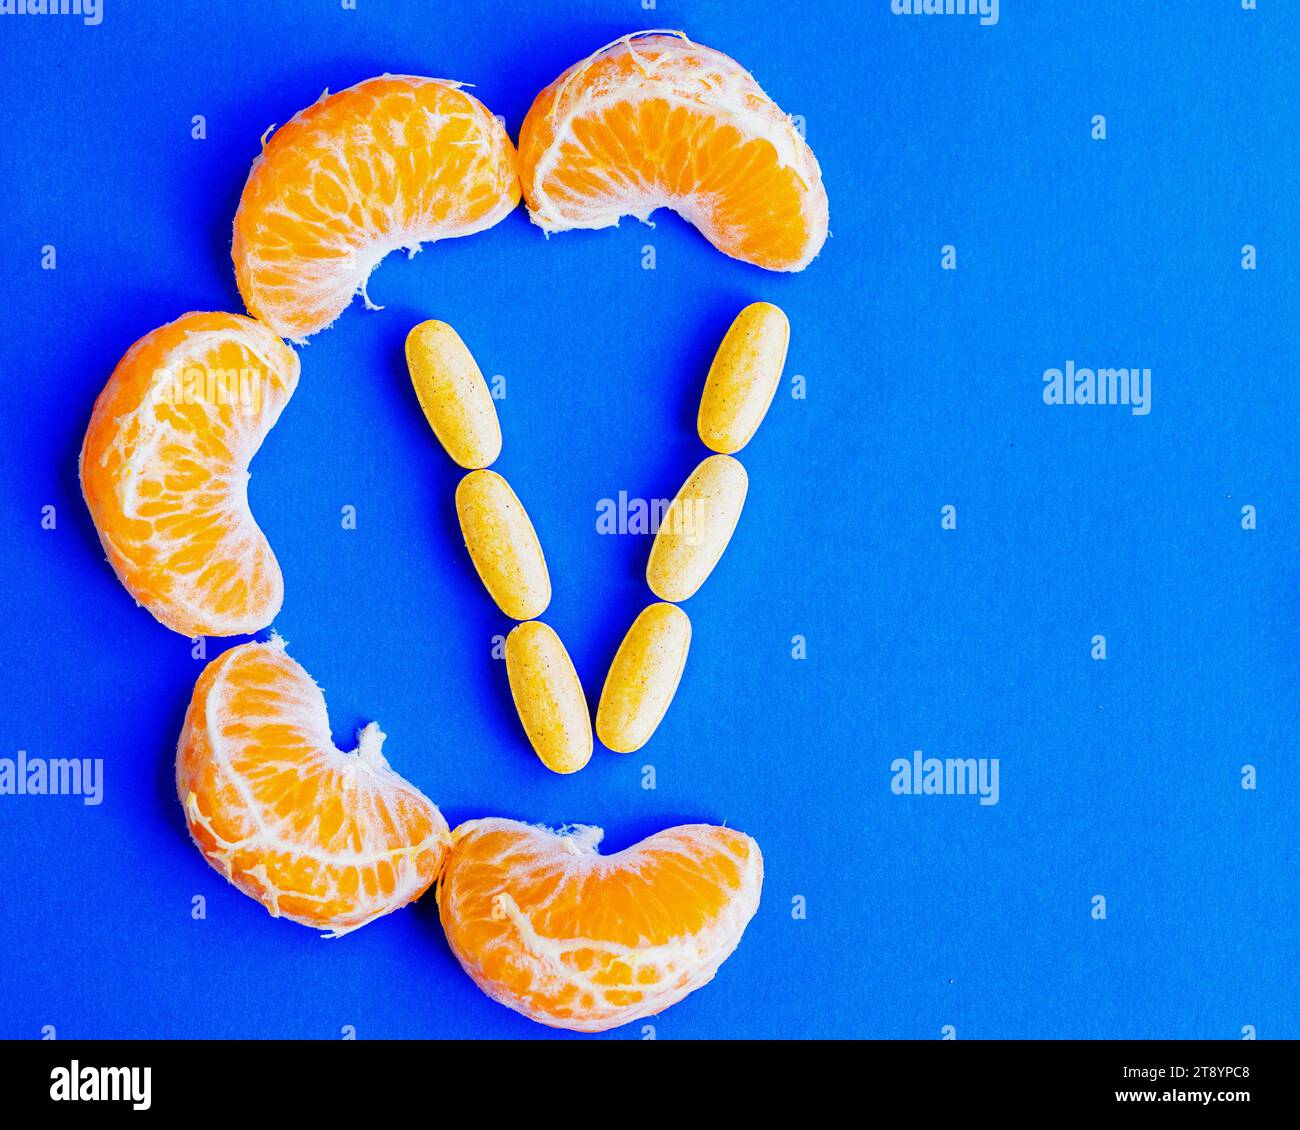 Tangerine slices forming the letter 'C' and Vitamin C pills forming the letter 'V'. Concept of Vitamin C artificial and natural sources Stock Photo